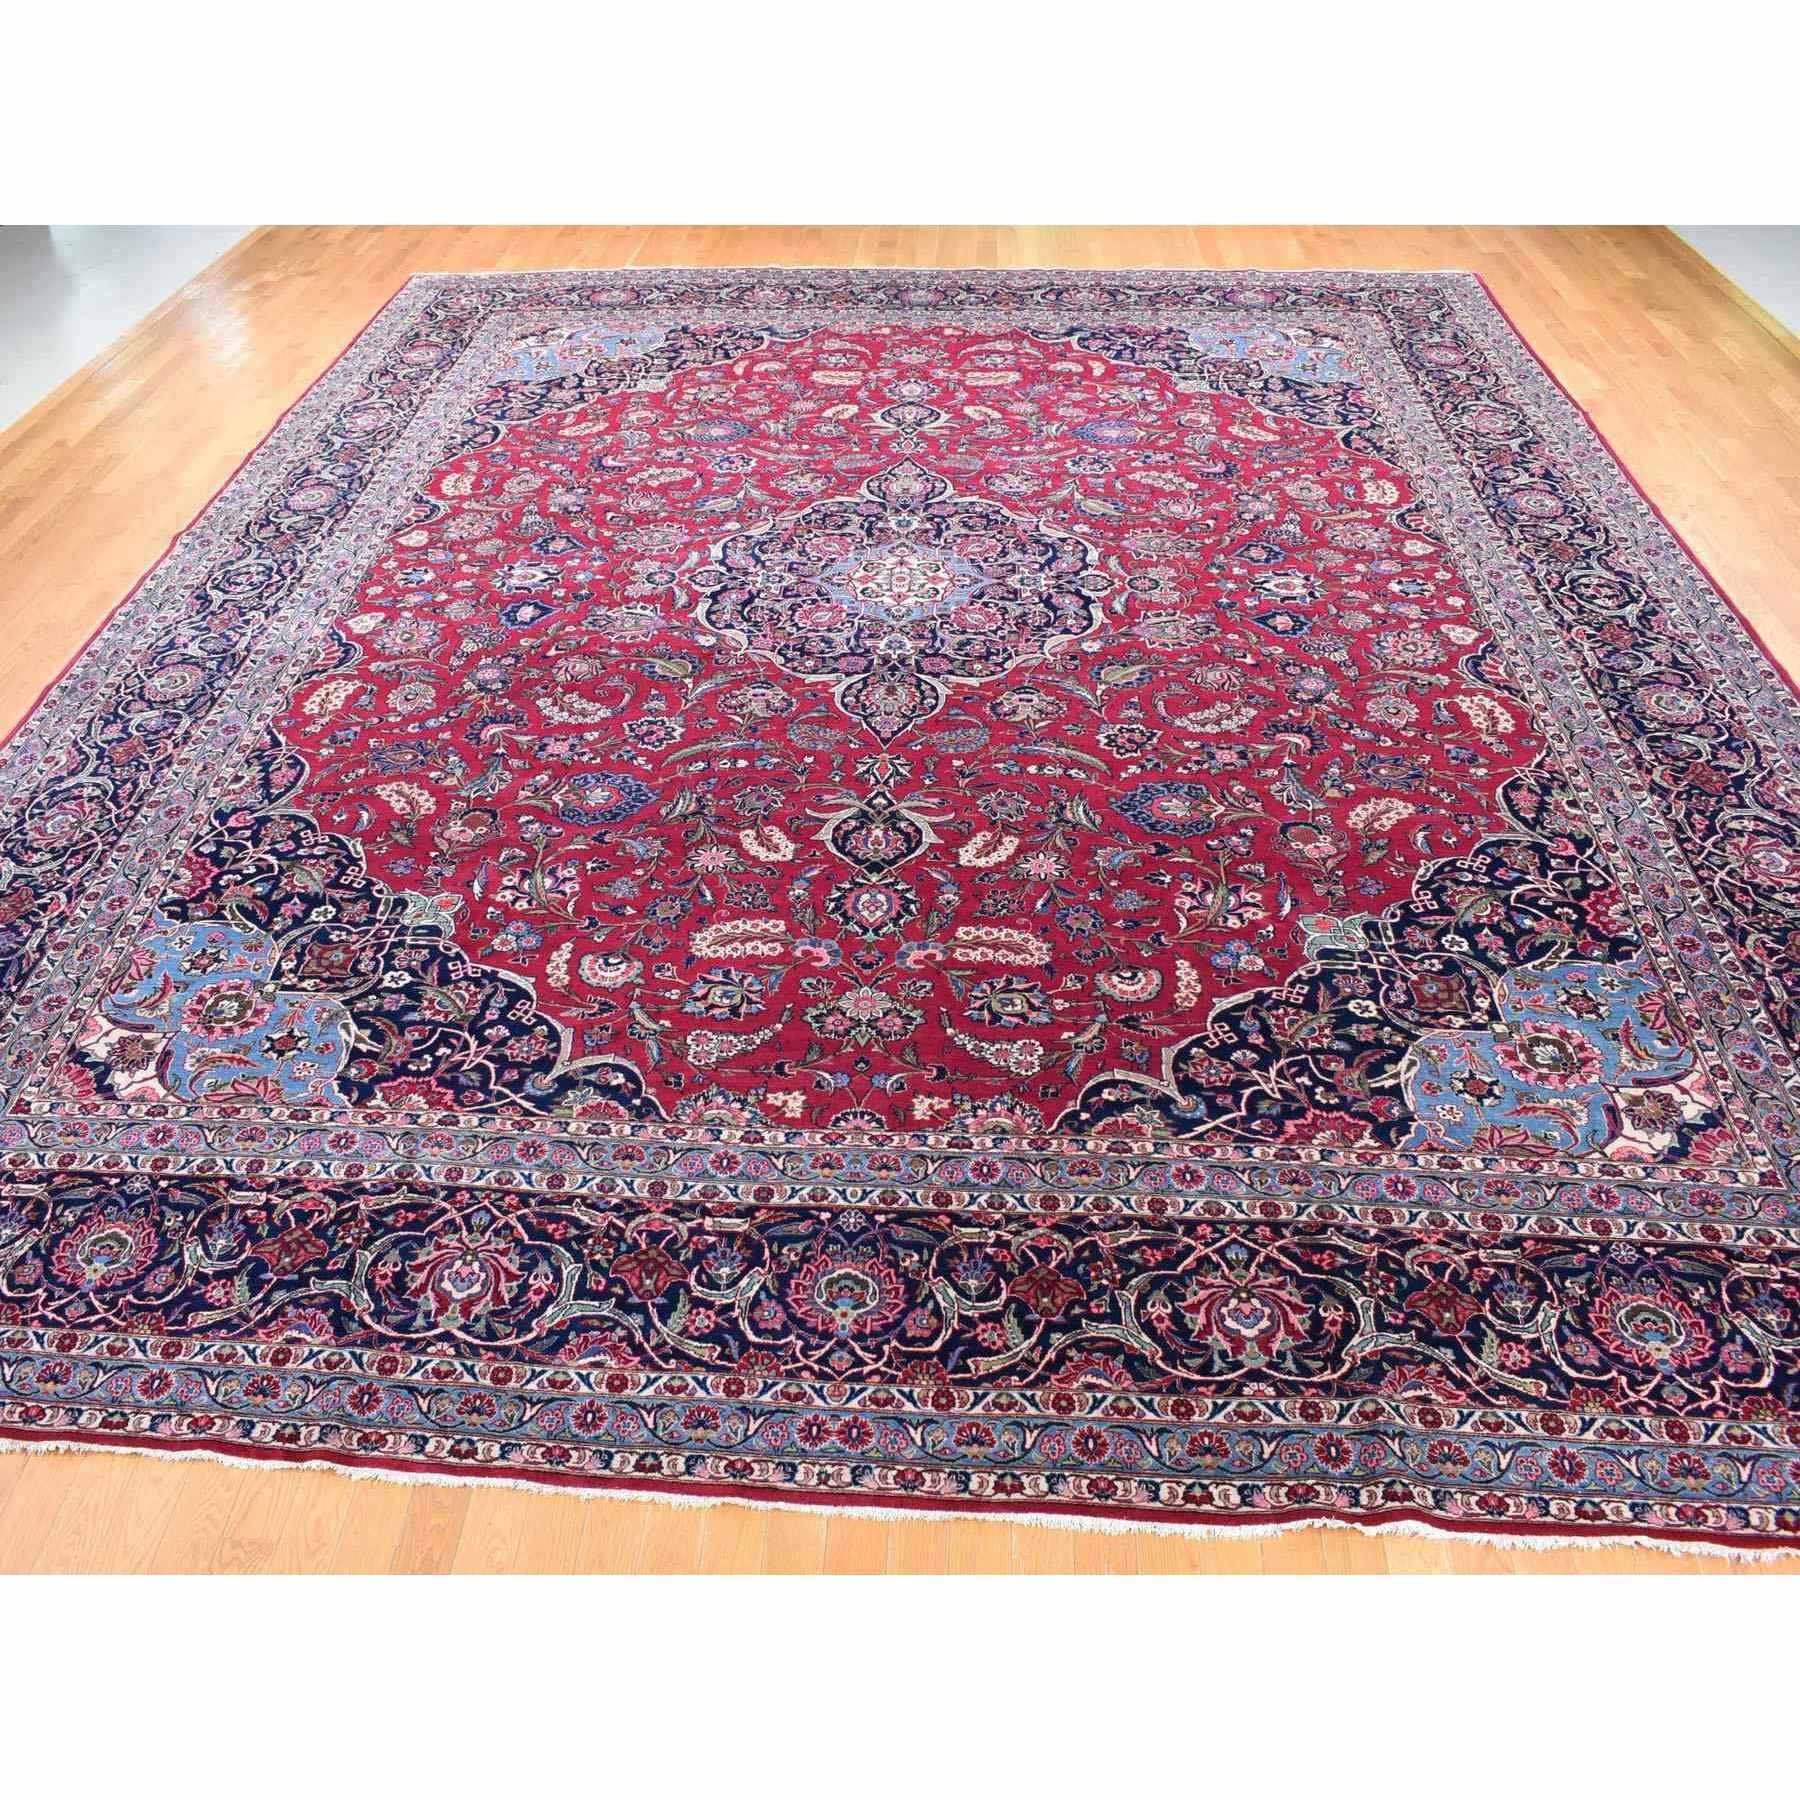 This fabulous hand-knotted carpet has been created and designed for extra strength and durability. This rug has been handcrafted for weeks in the traditional method that is used to make
Exact Rug Size in Feet and Inches : 14'2